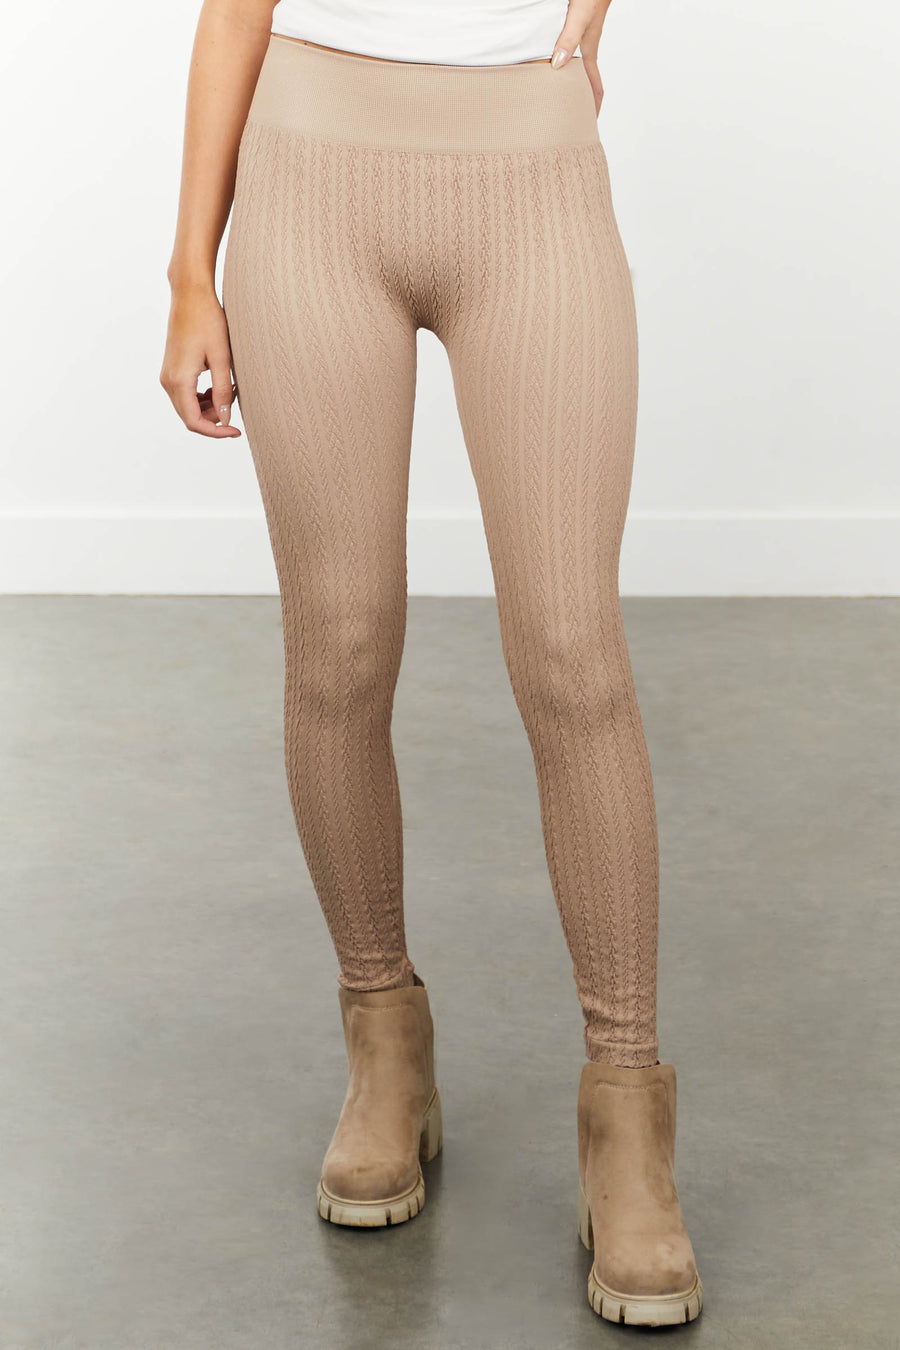 Latte Cable Knit High Waisted Leggings